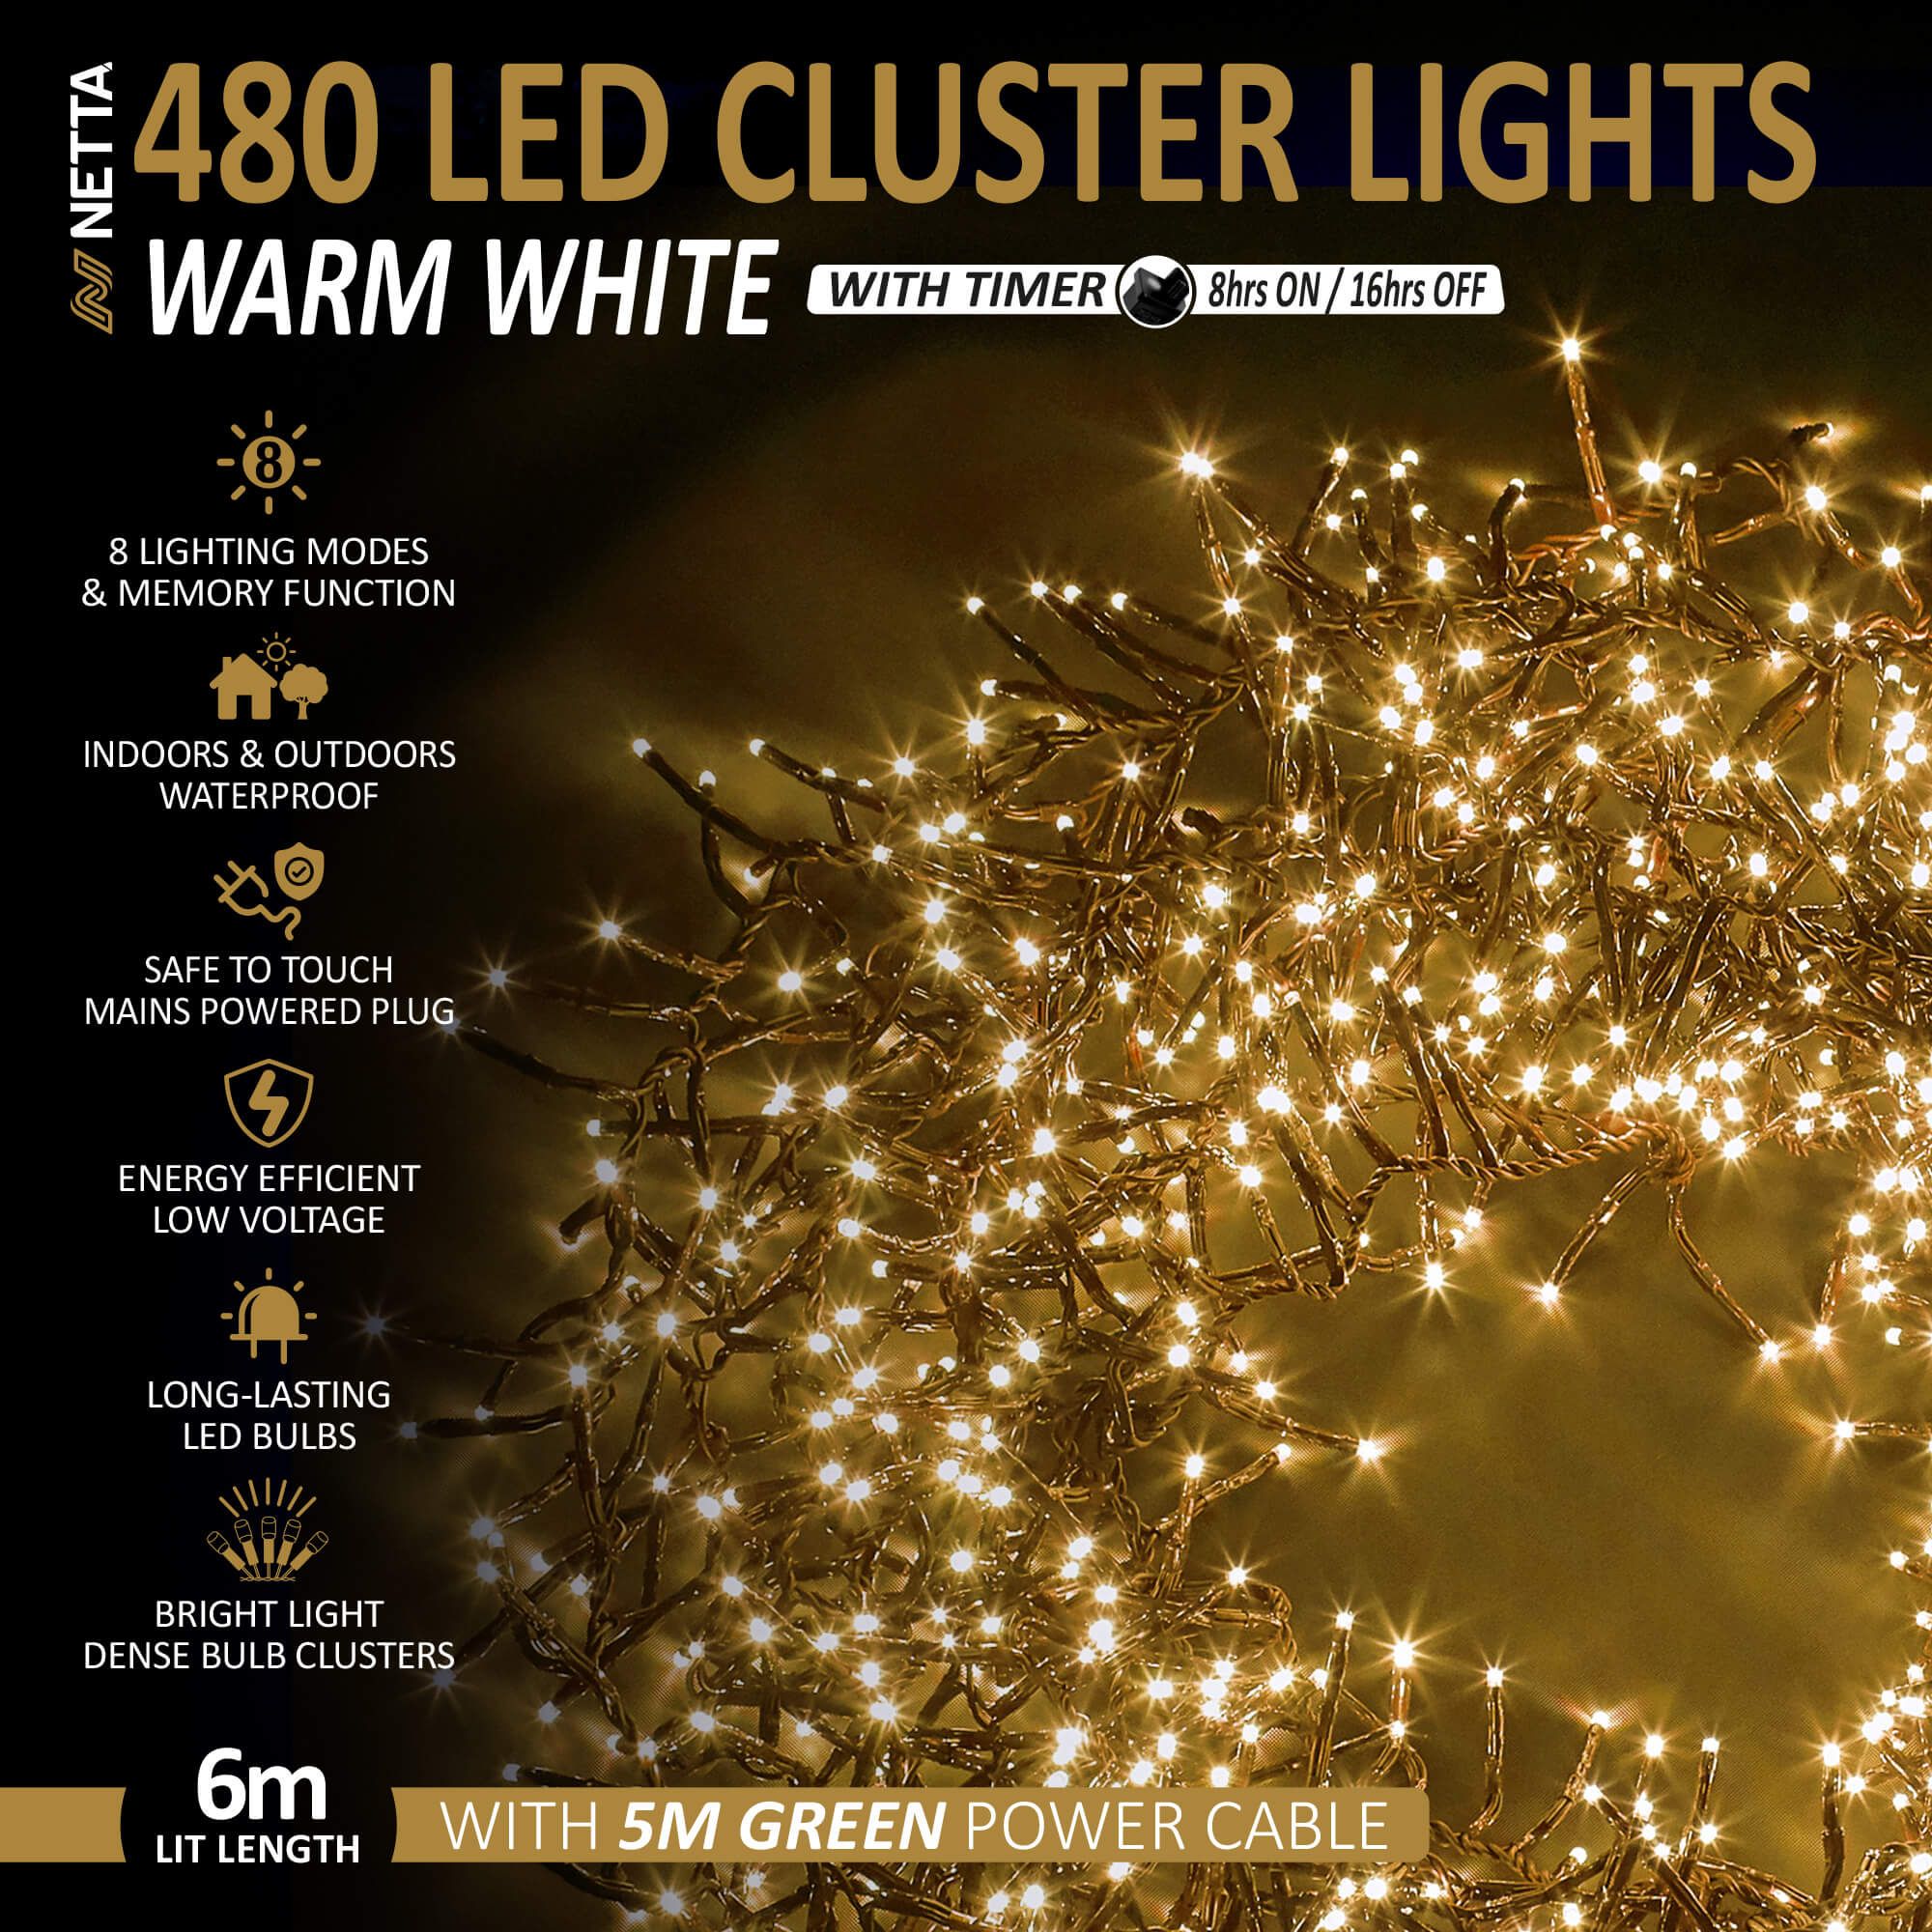 NETTA 480 LED 6M Cluster String Lights Outdoor and Indoor Plug In - Warm White